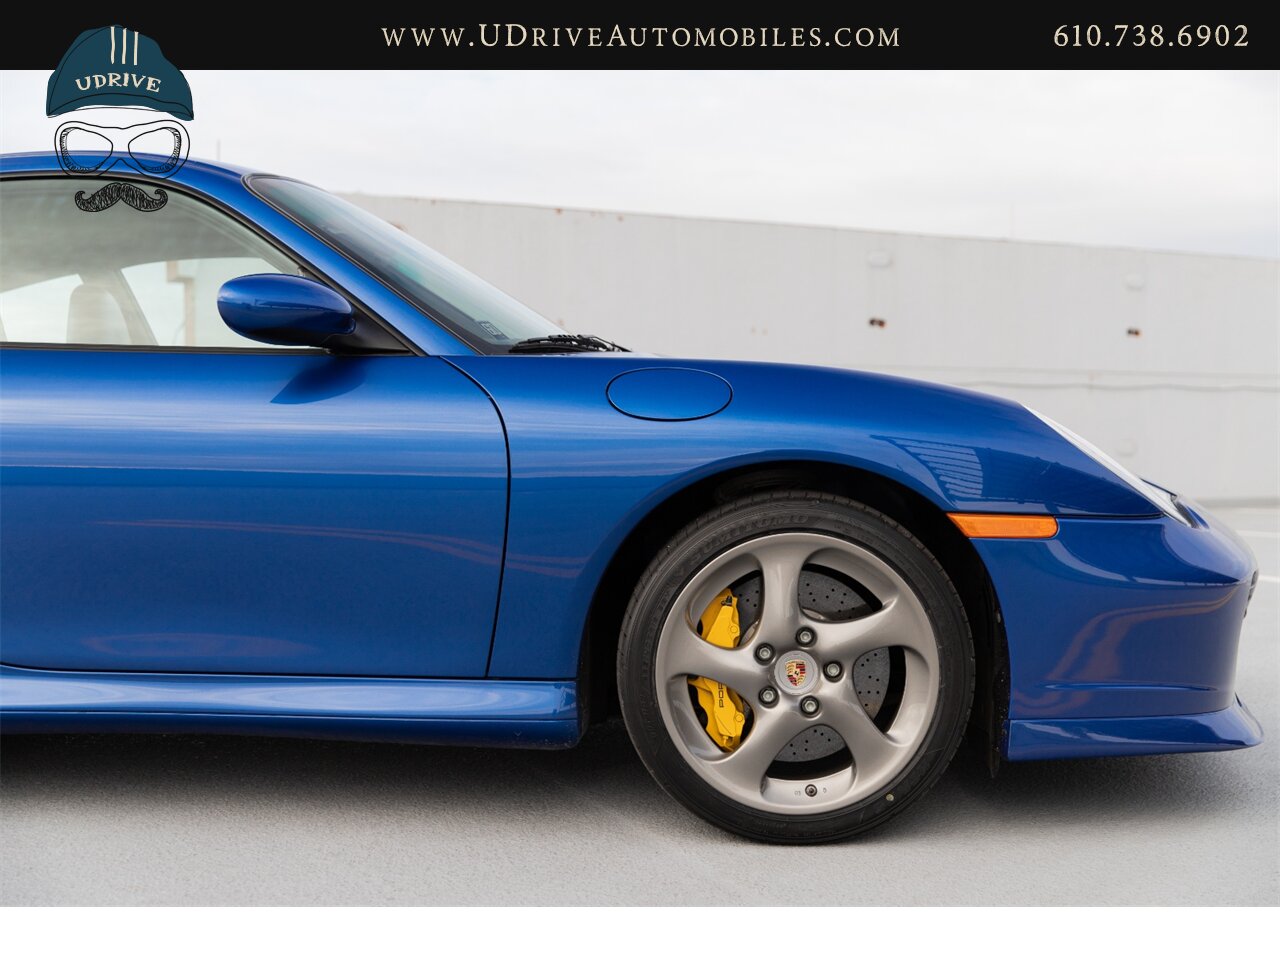 2005 Porsche 911 Turbo S Factory Aerokit Extremely Rare Cobalt Blue  Yellow Deviating Stitching 1 of a Kind Spec $160k MSRP - Photo 17 - West Chester, PA 19382